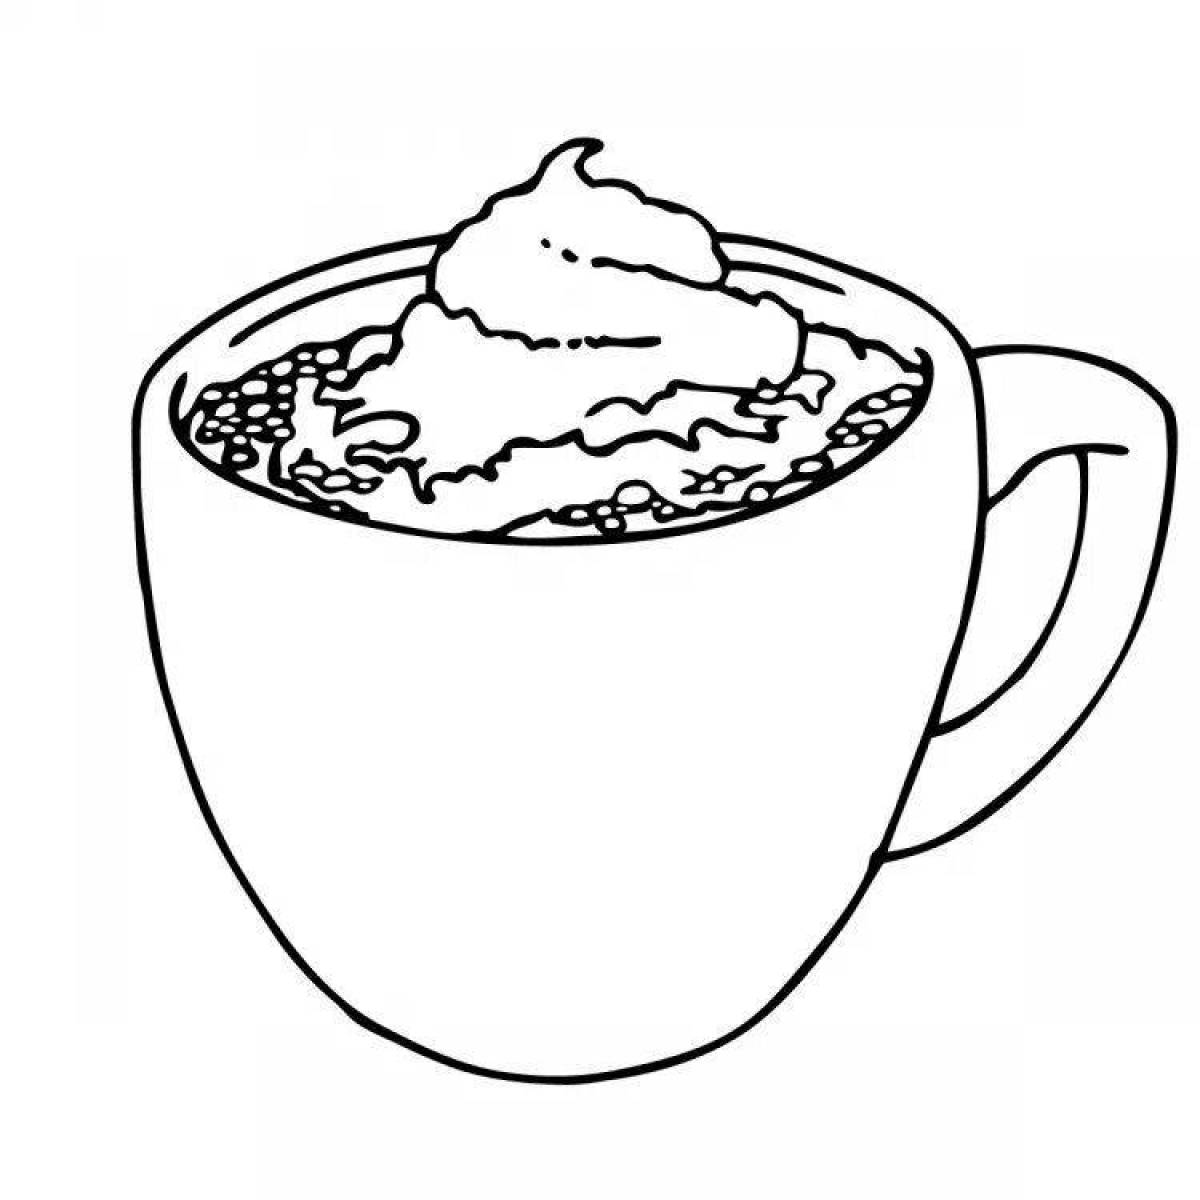 Cocoa awesome coloring page